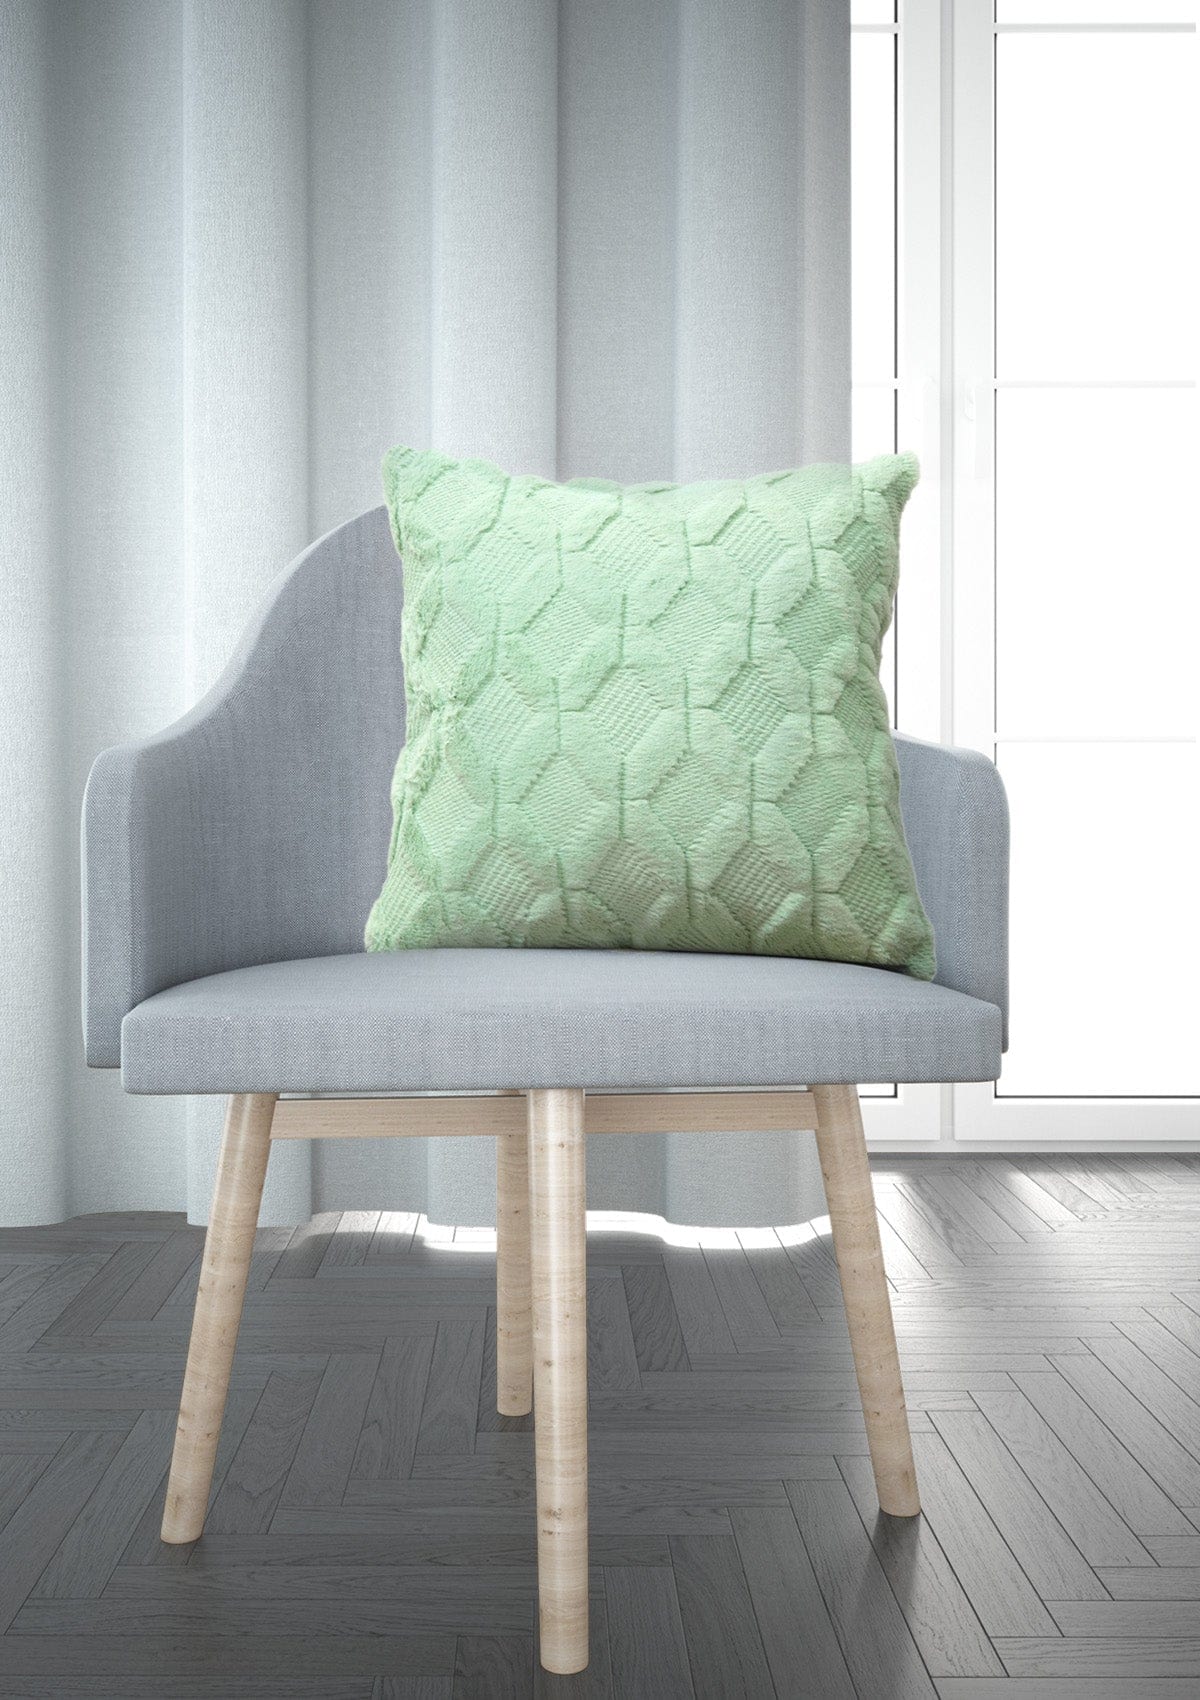 Green Serenity Fluffy Cushion Covers | CovermyCushion 30x50cm / Light Green / No thanks - cover only